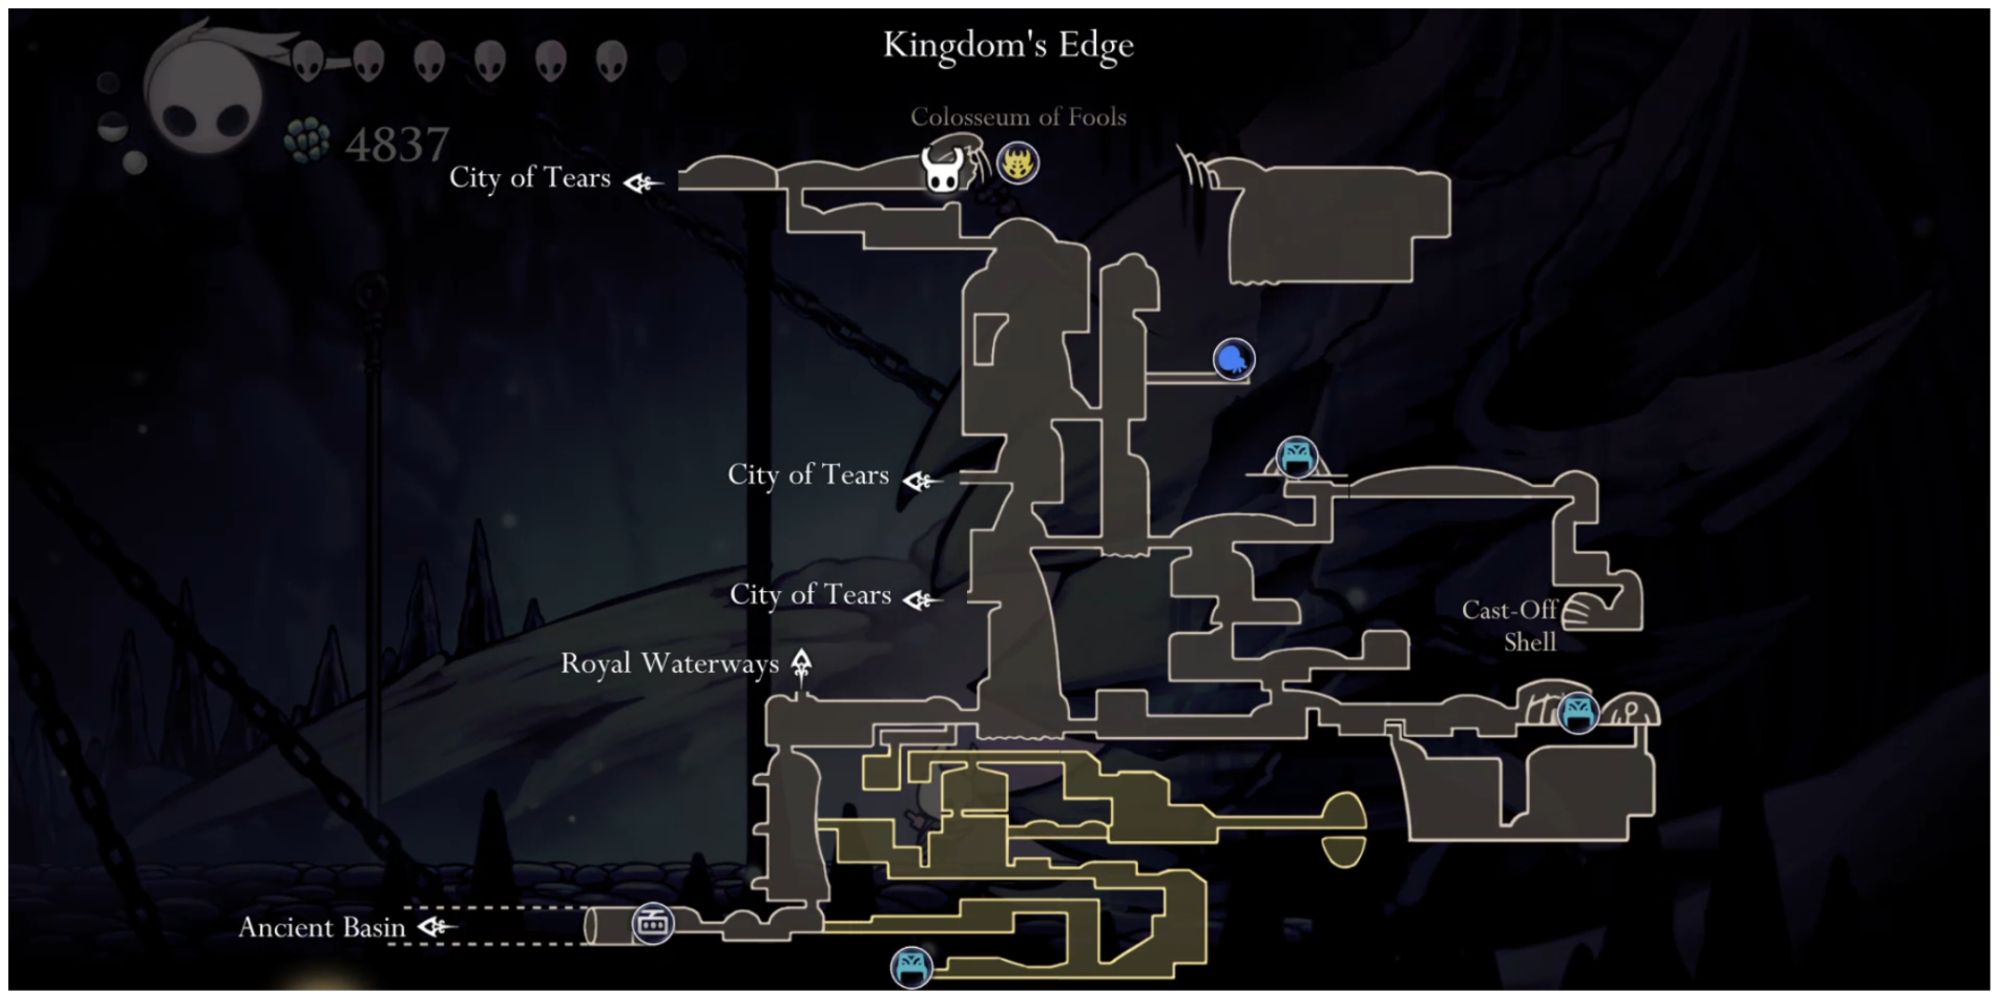 Hollow Knight Colosseum of Fools Location at the top of the Kingdom's Edge area